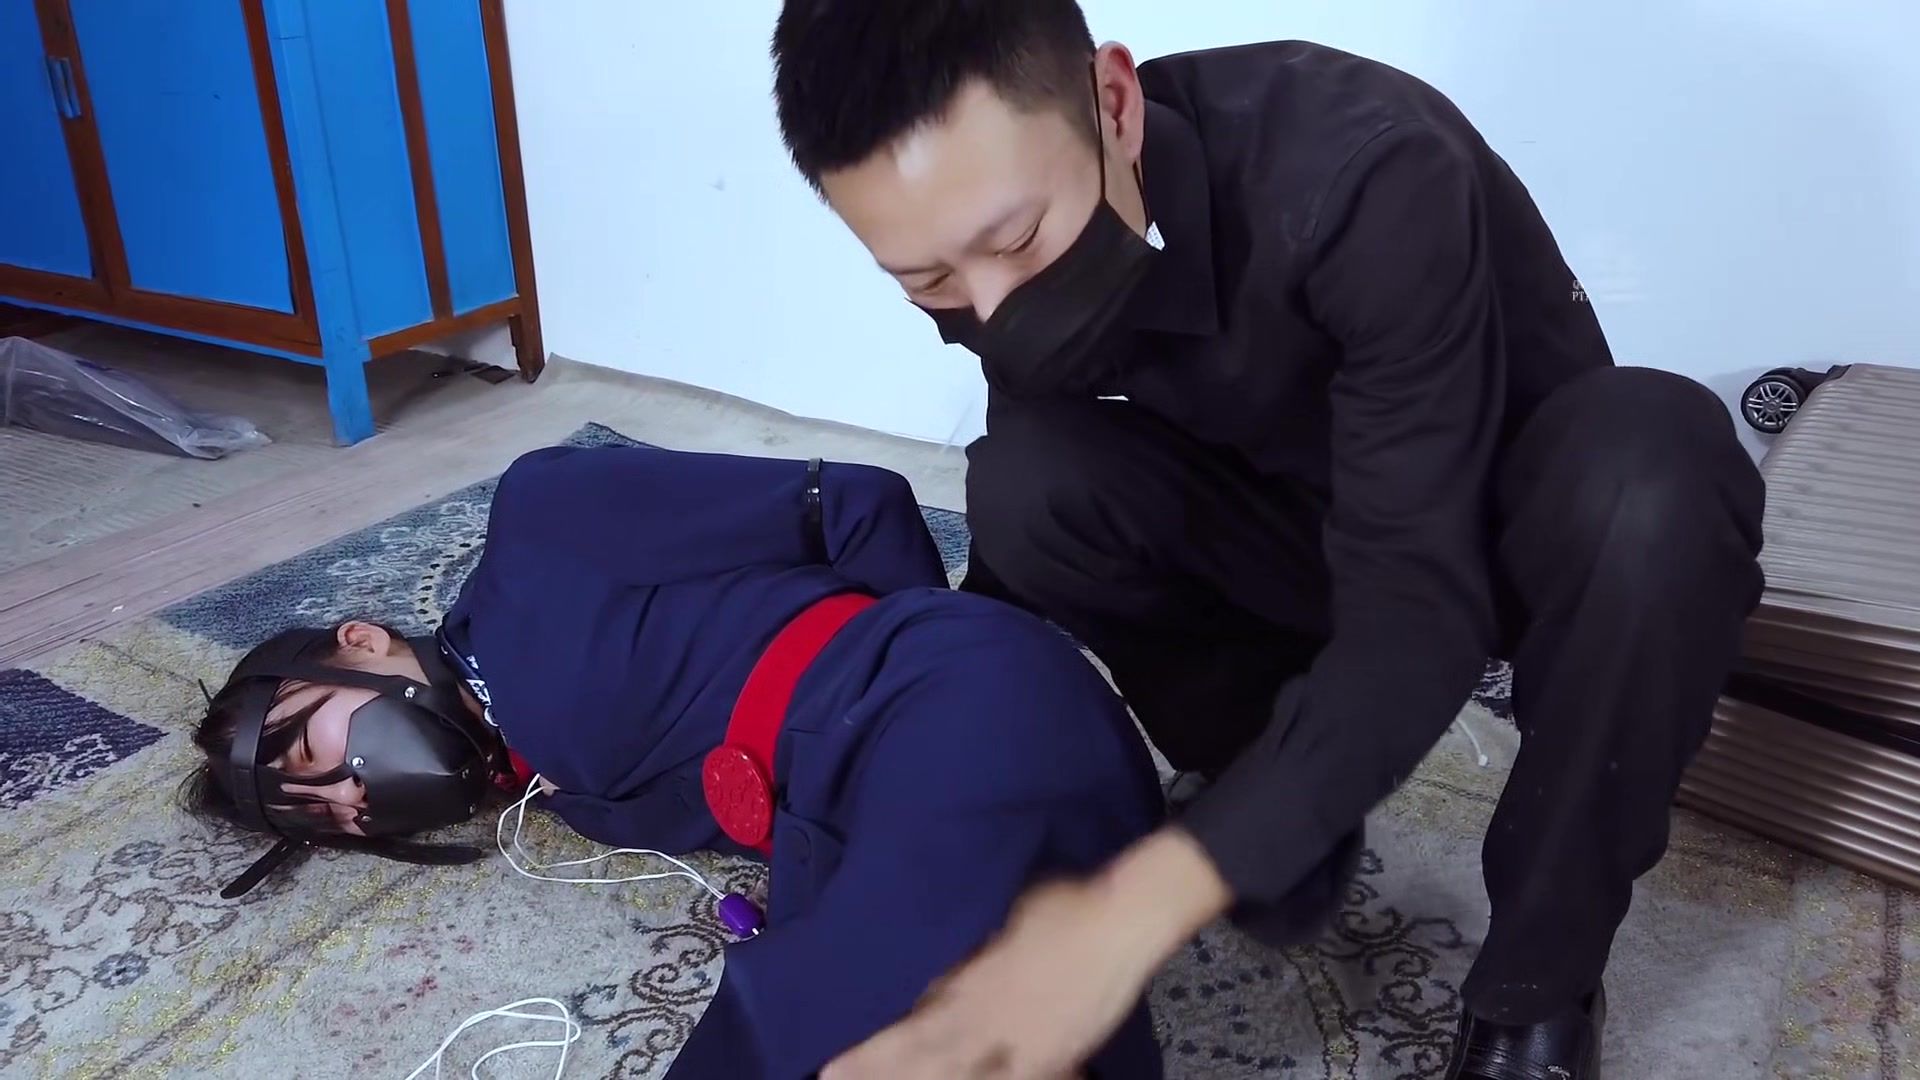 TheyDidntKnow Asian Ziptied Left In Suitcase Monstercock